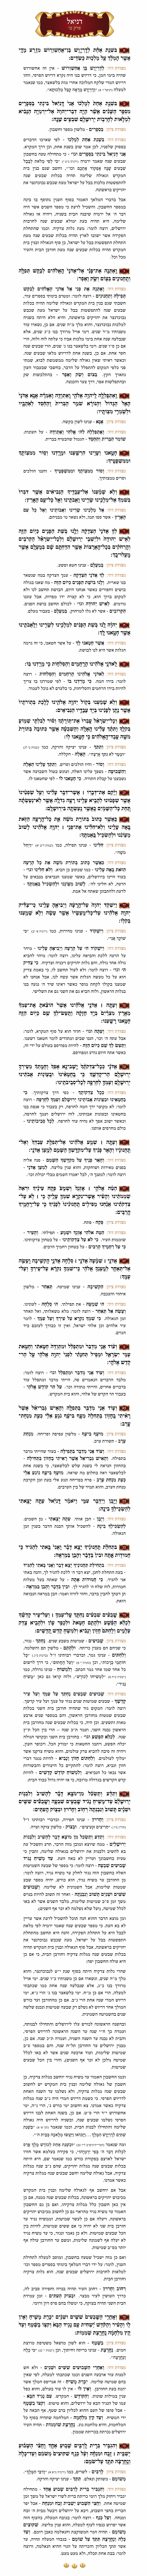 Sefer Daniel Chapter 9 with commentary